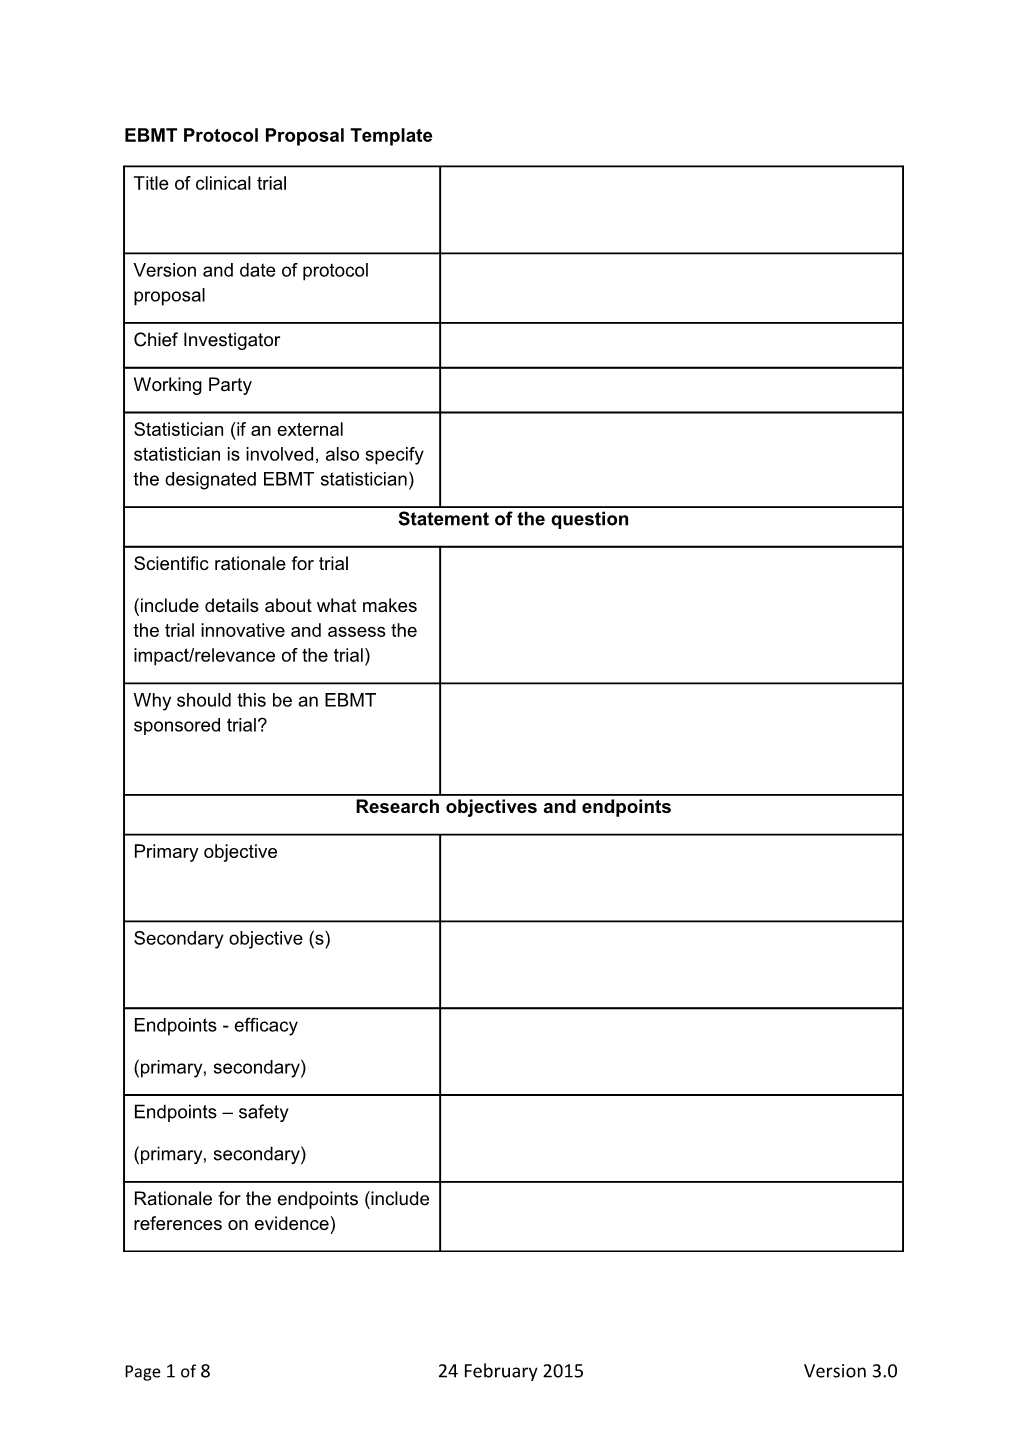 EBMT CT2 Protocol Proposal Template